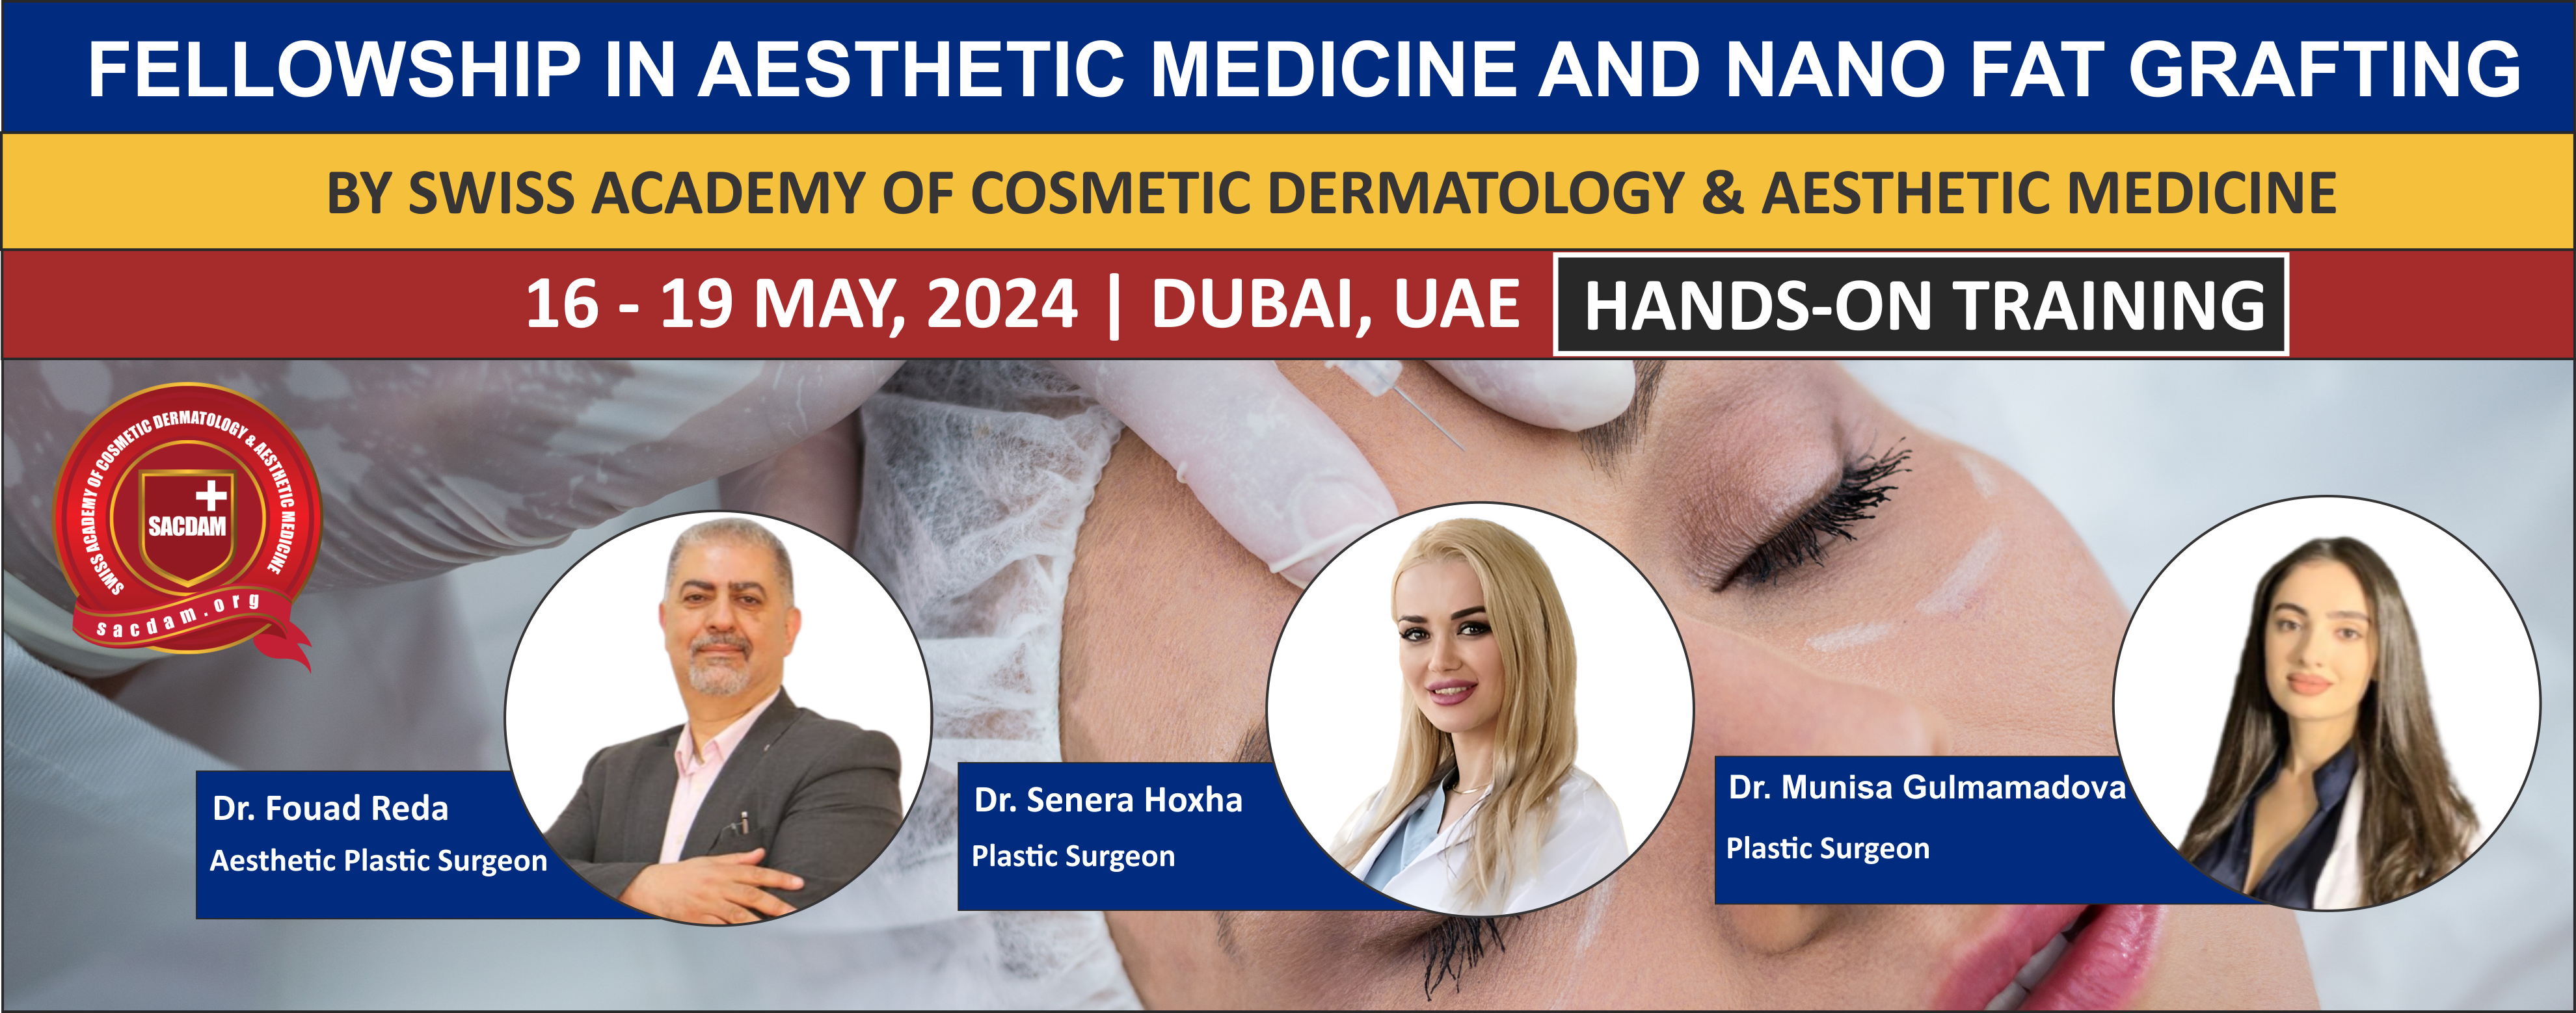 Banner - Fellowship in Aesthetic Medicine and Nano Fat Grafting 16 - 19 May, 2024 - Hands-on